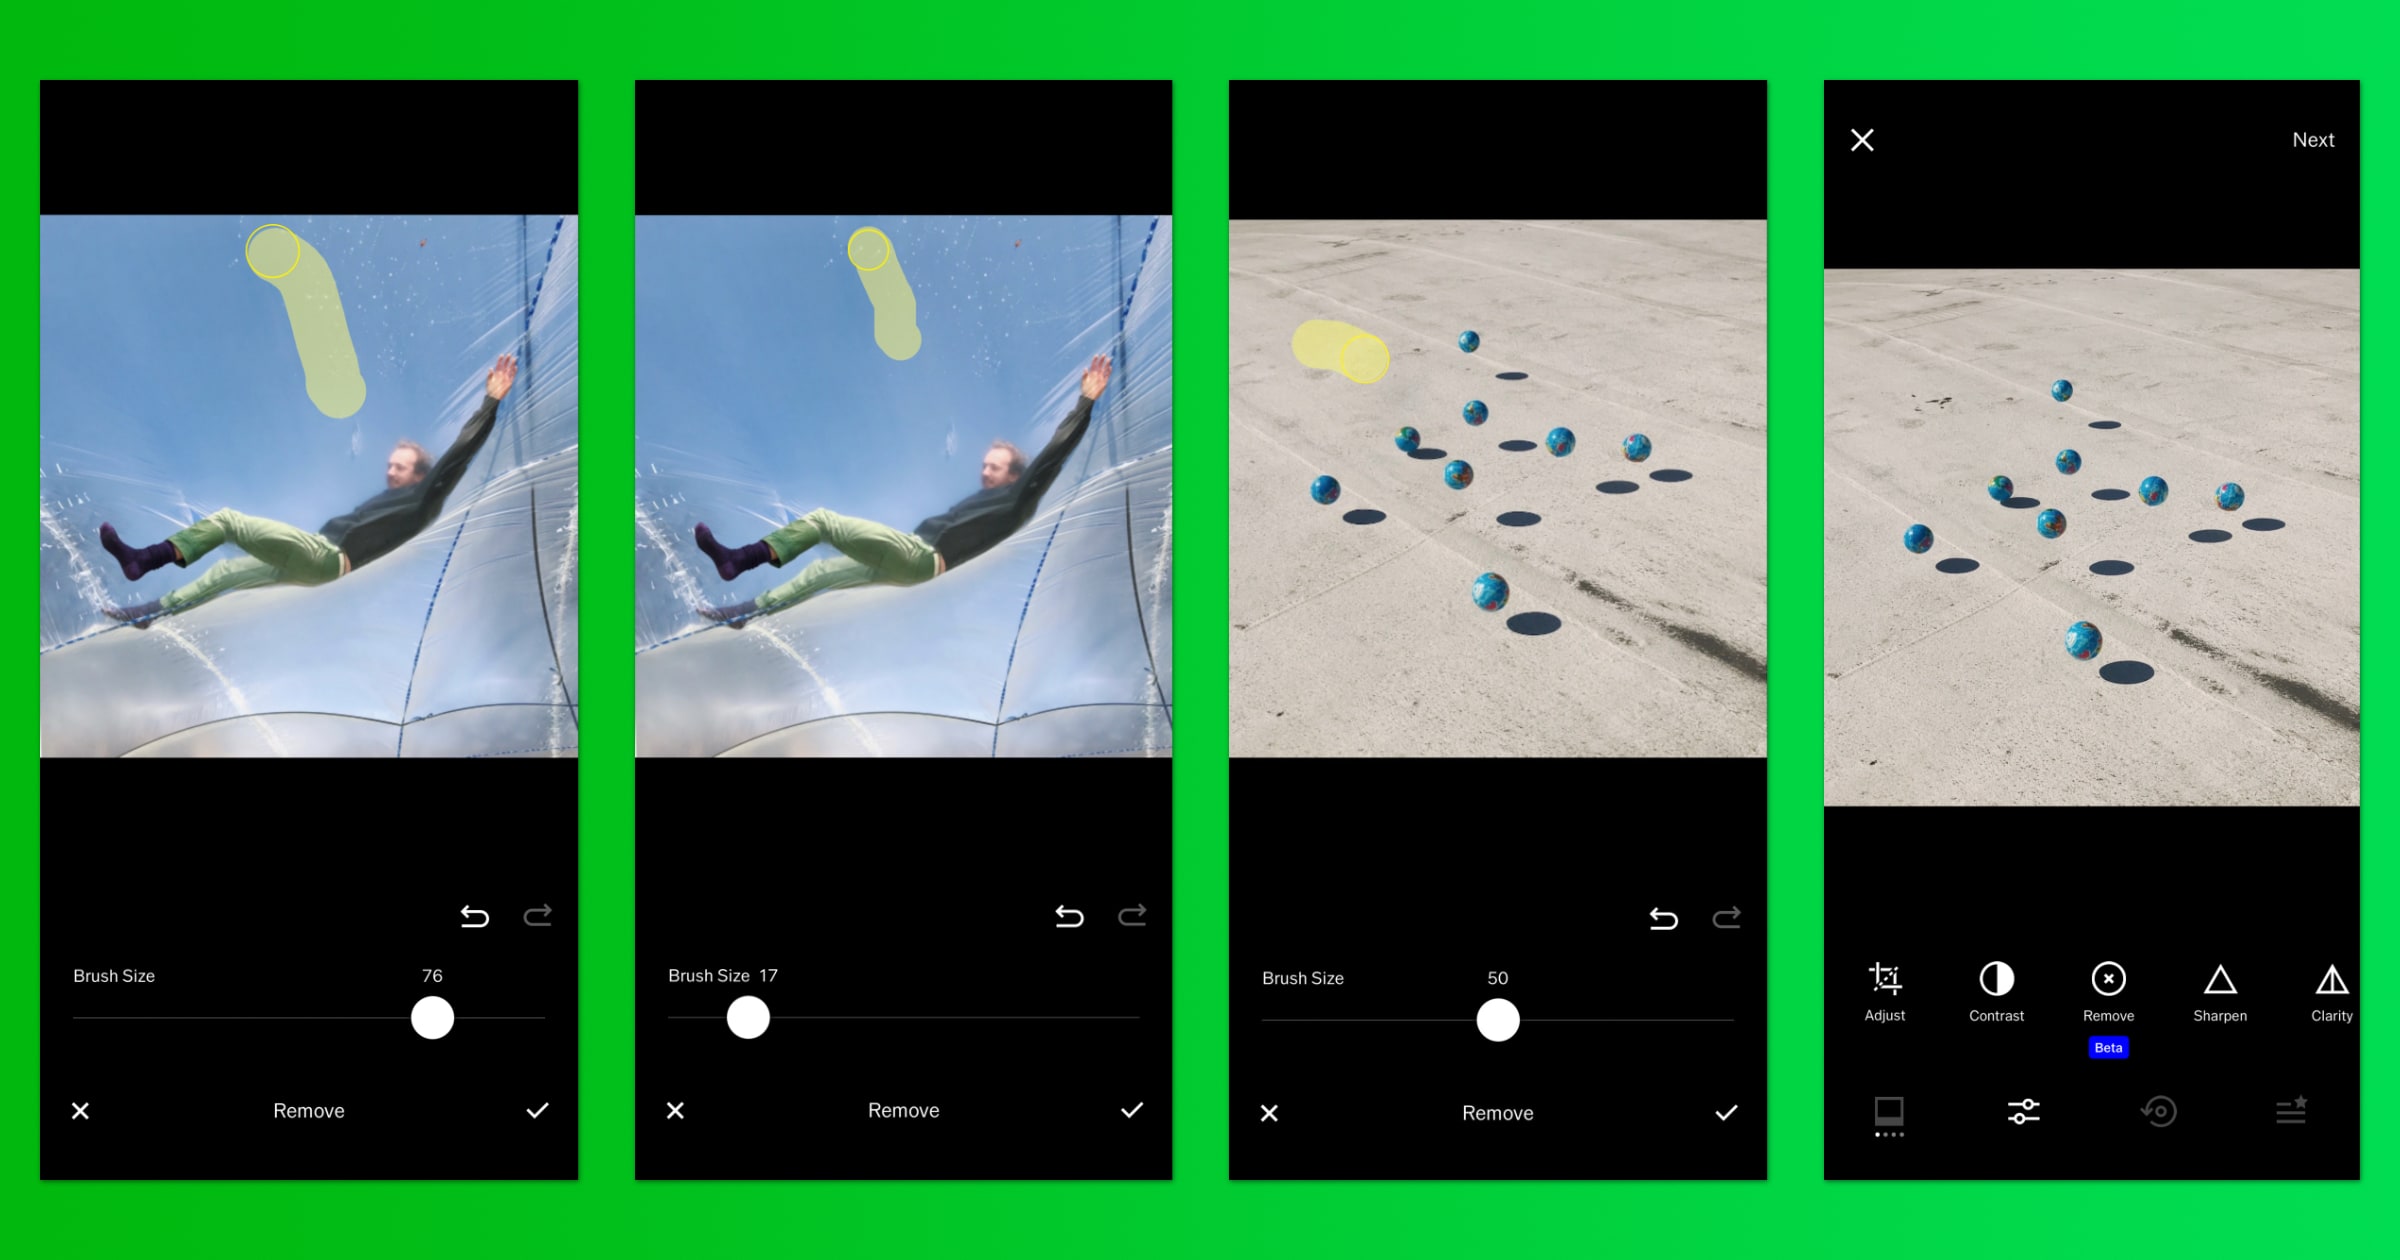 VSCO Introduces a Healing Tool for Members Called ‘Remove’